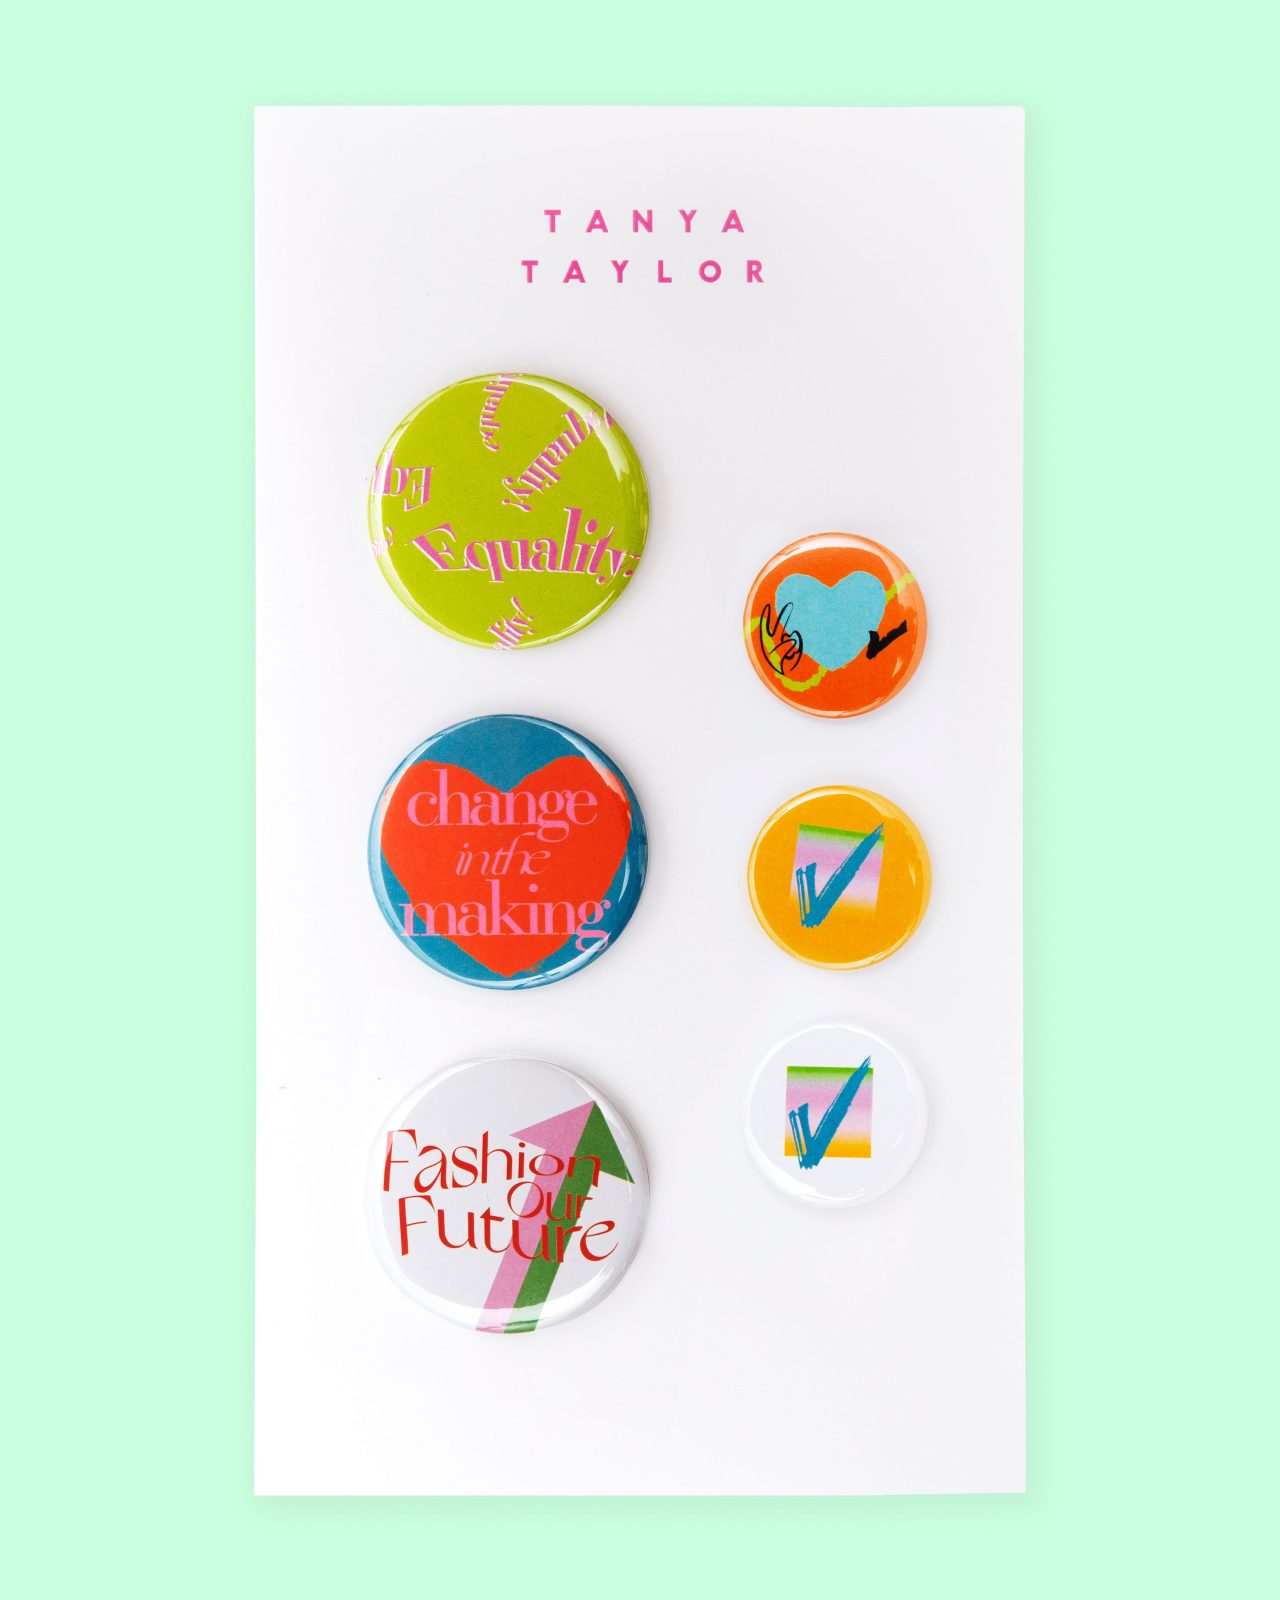 Tanya Taylor Buttons, presented by Visa ($40)